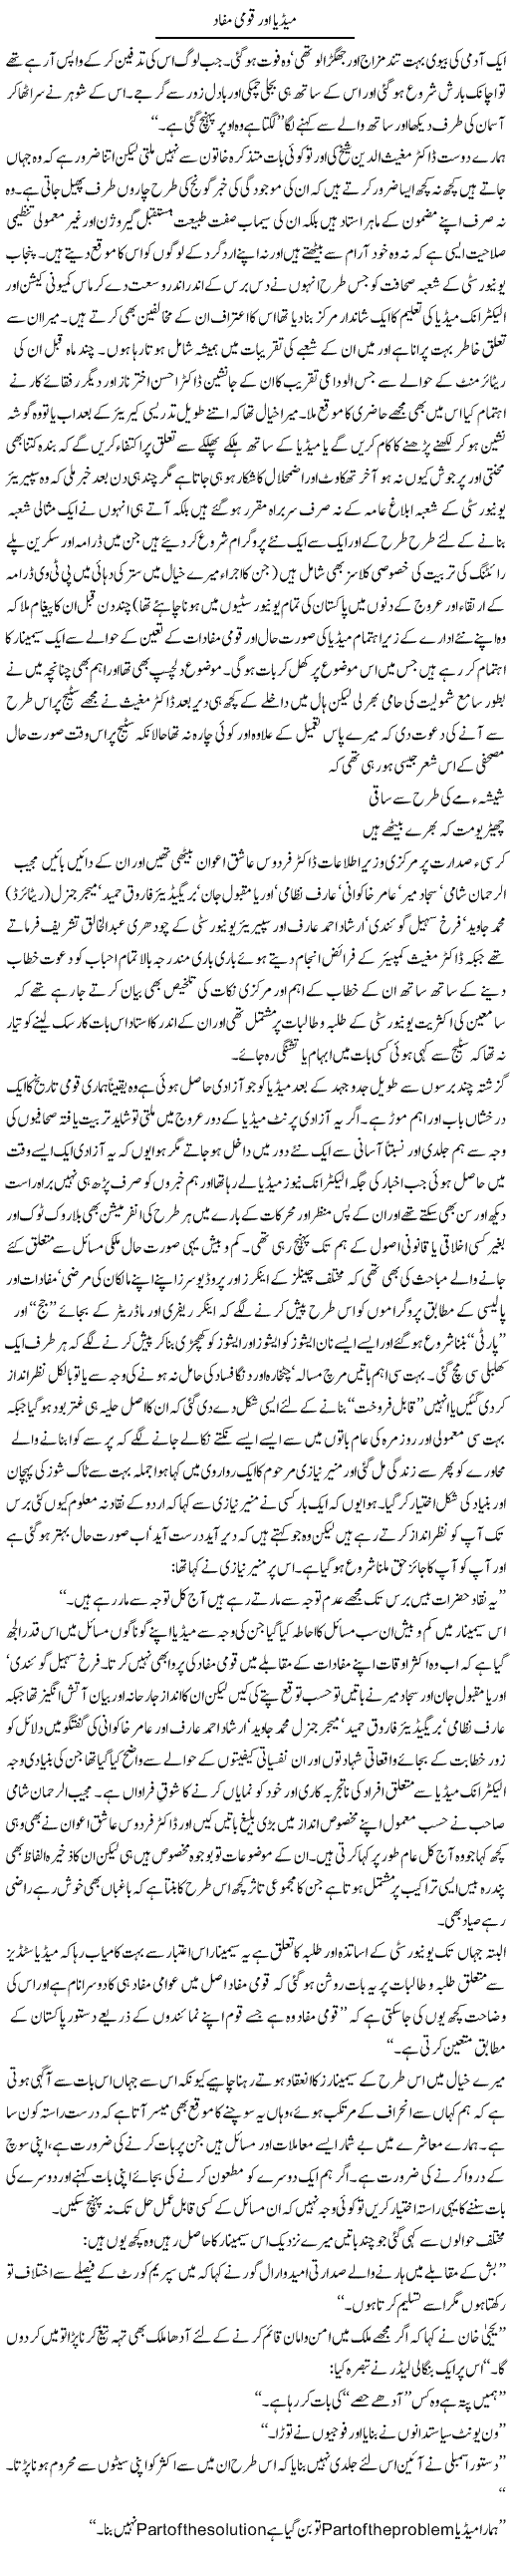 Media and Benefits of Nation Express Column Amjad Islam 11 August 2011